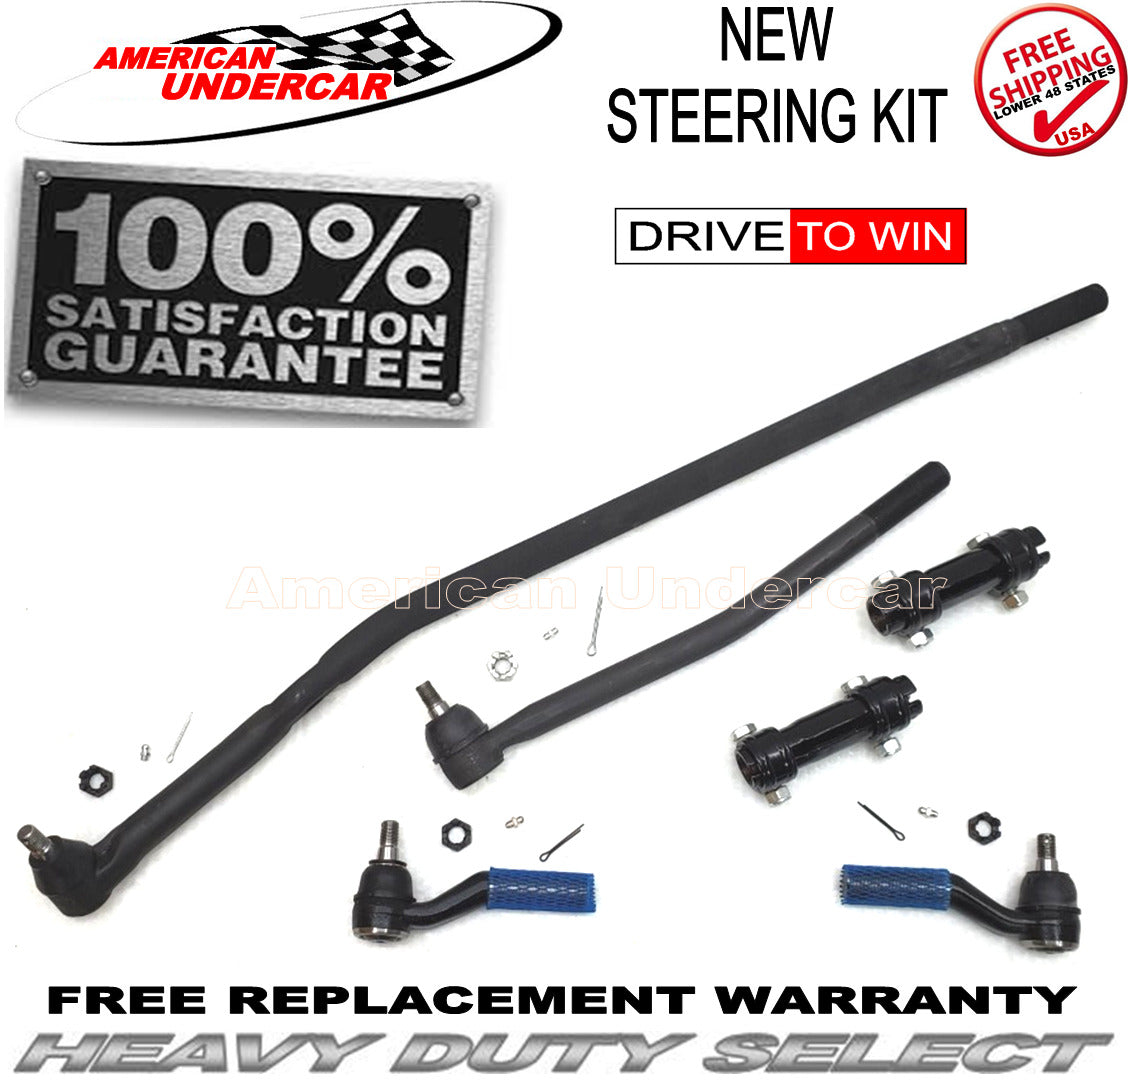 HD Drag Link Tie Rod Sleeve Steering Kit for 1992-2006 Ford E250 SRW